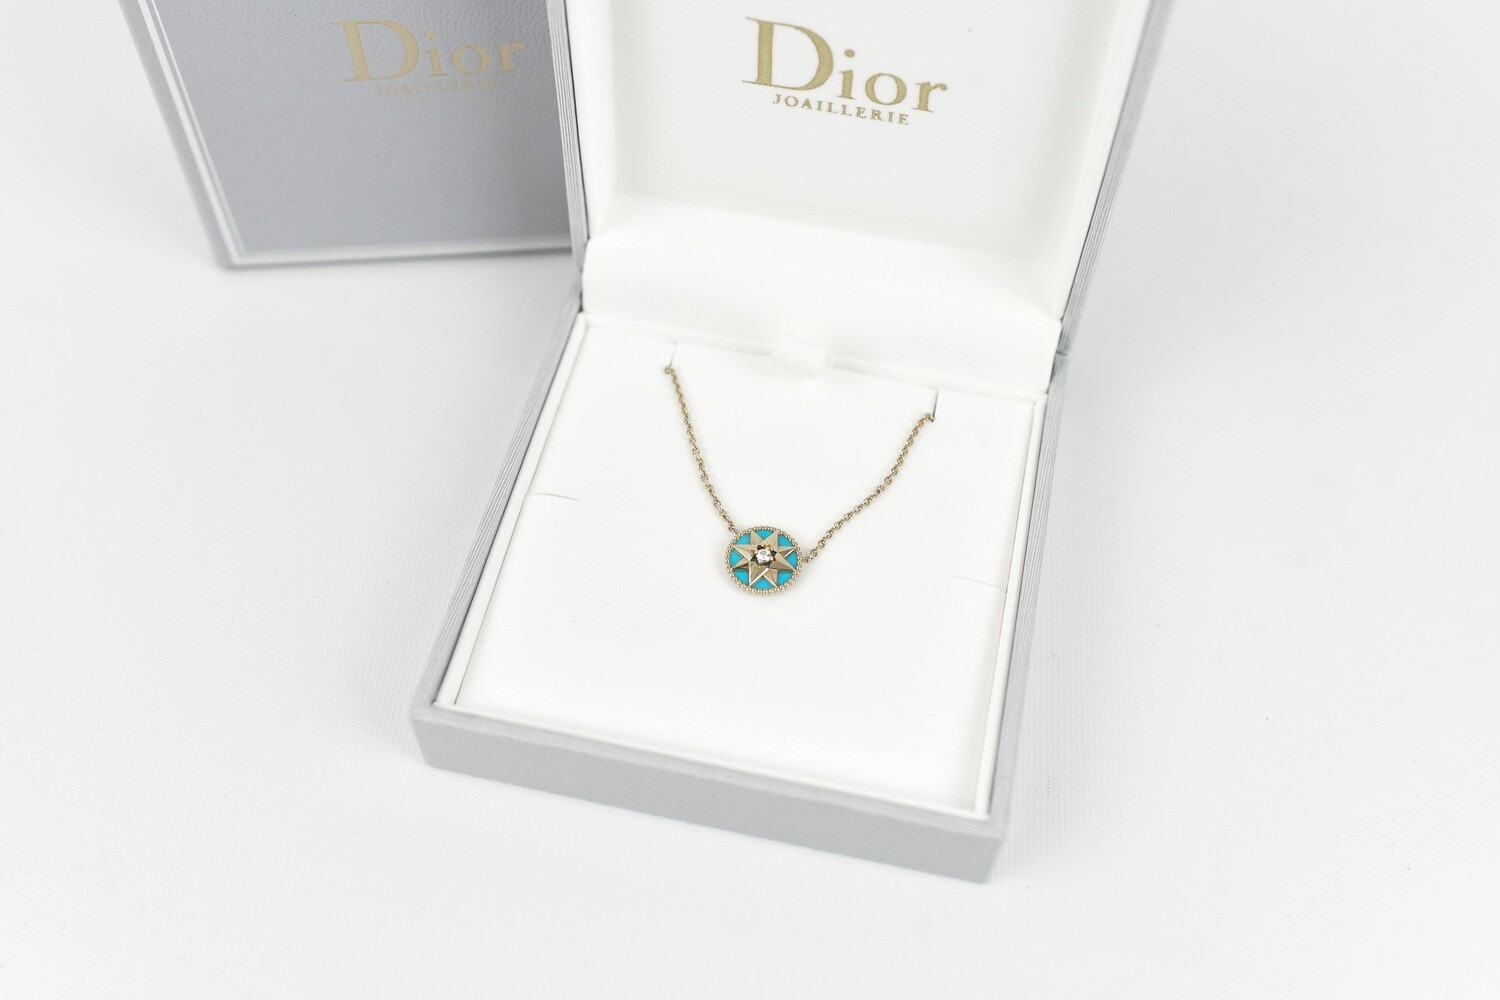 Christian Dior Rose Des Vents, Gold, Turquoise, and Diamond Necklace, New  in Box GA003 - Julia Rose Boston